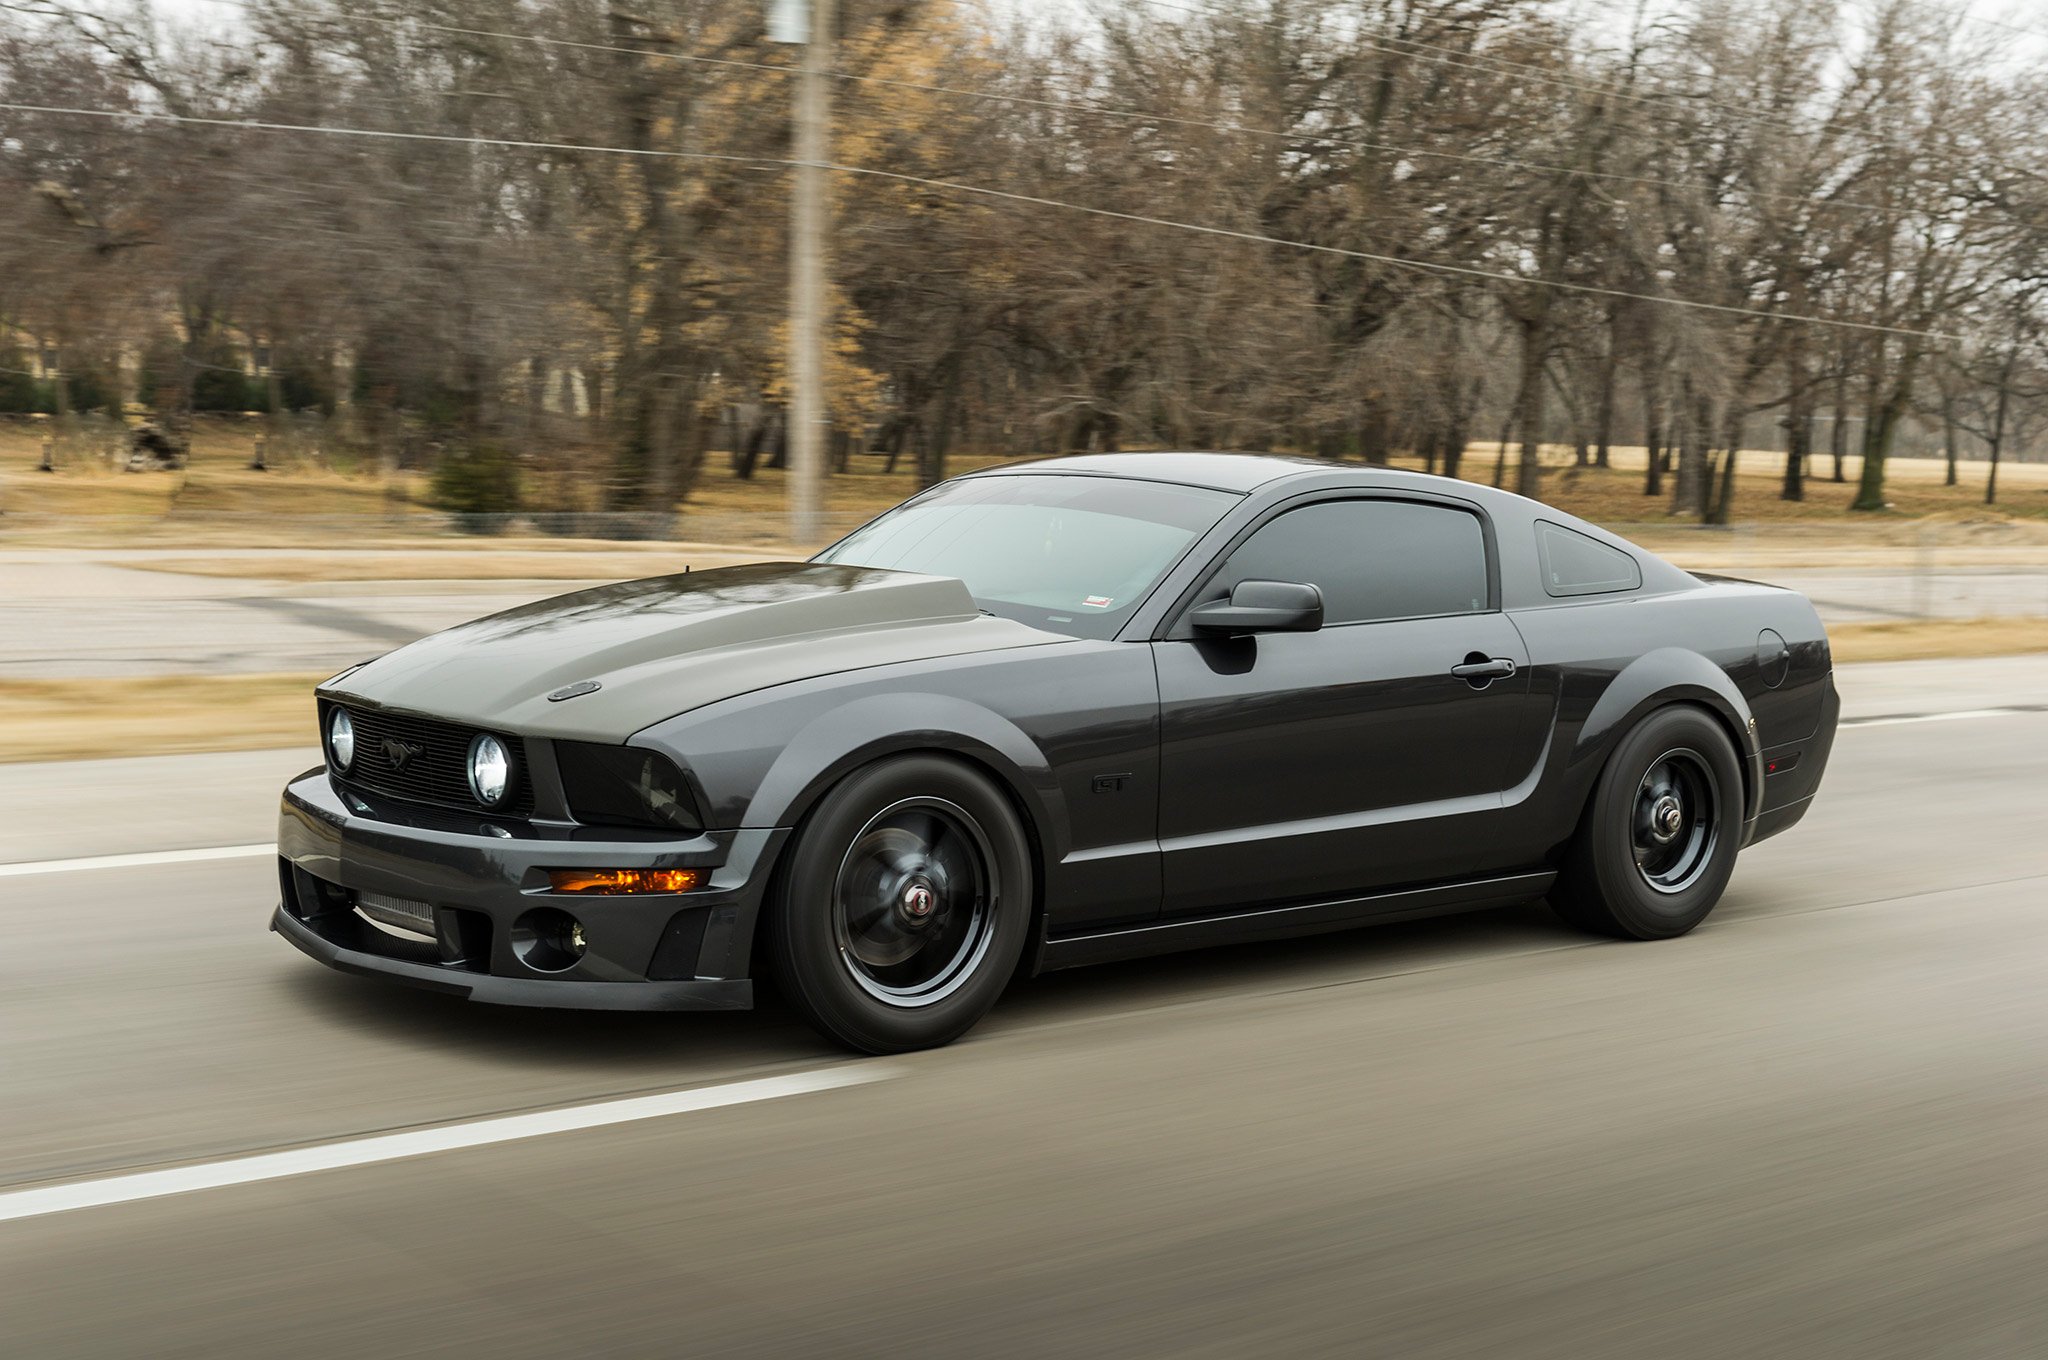 2007, Ford, Mustang, Gt, Pro, Street, Super, Drag, Muscle, Usa, 2048x1360 03 Wallpaper